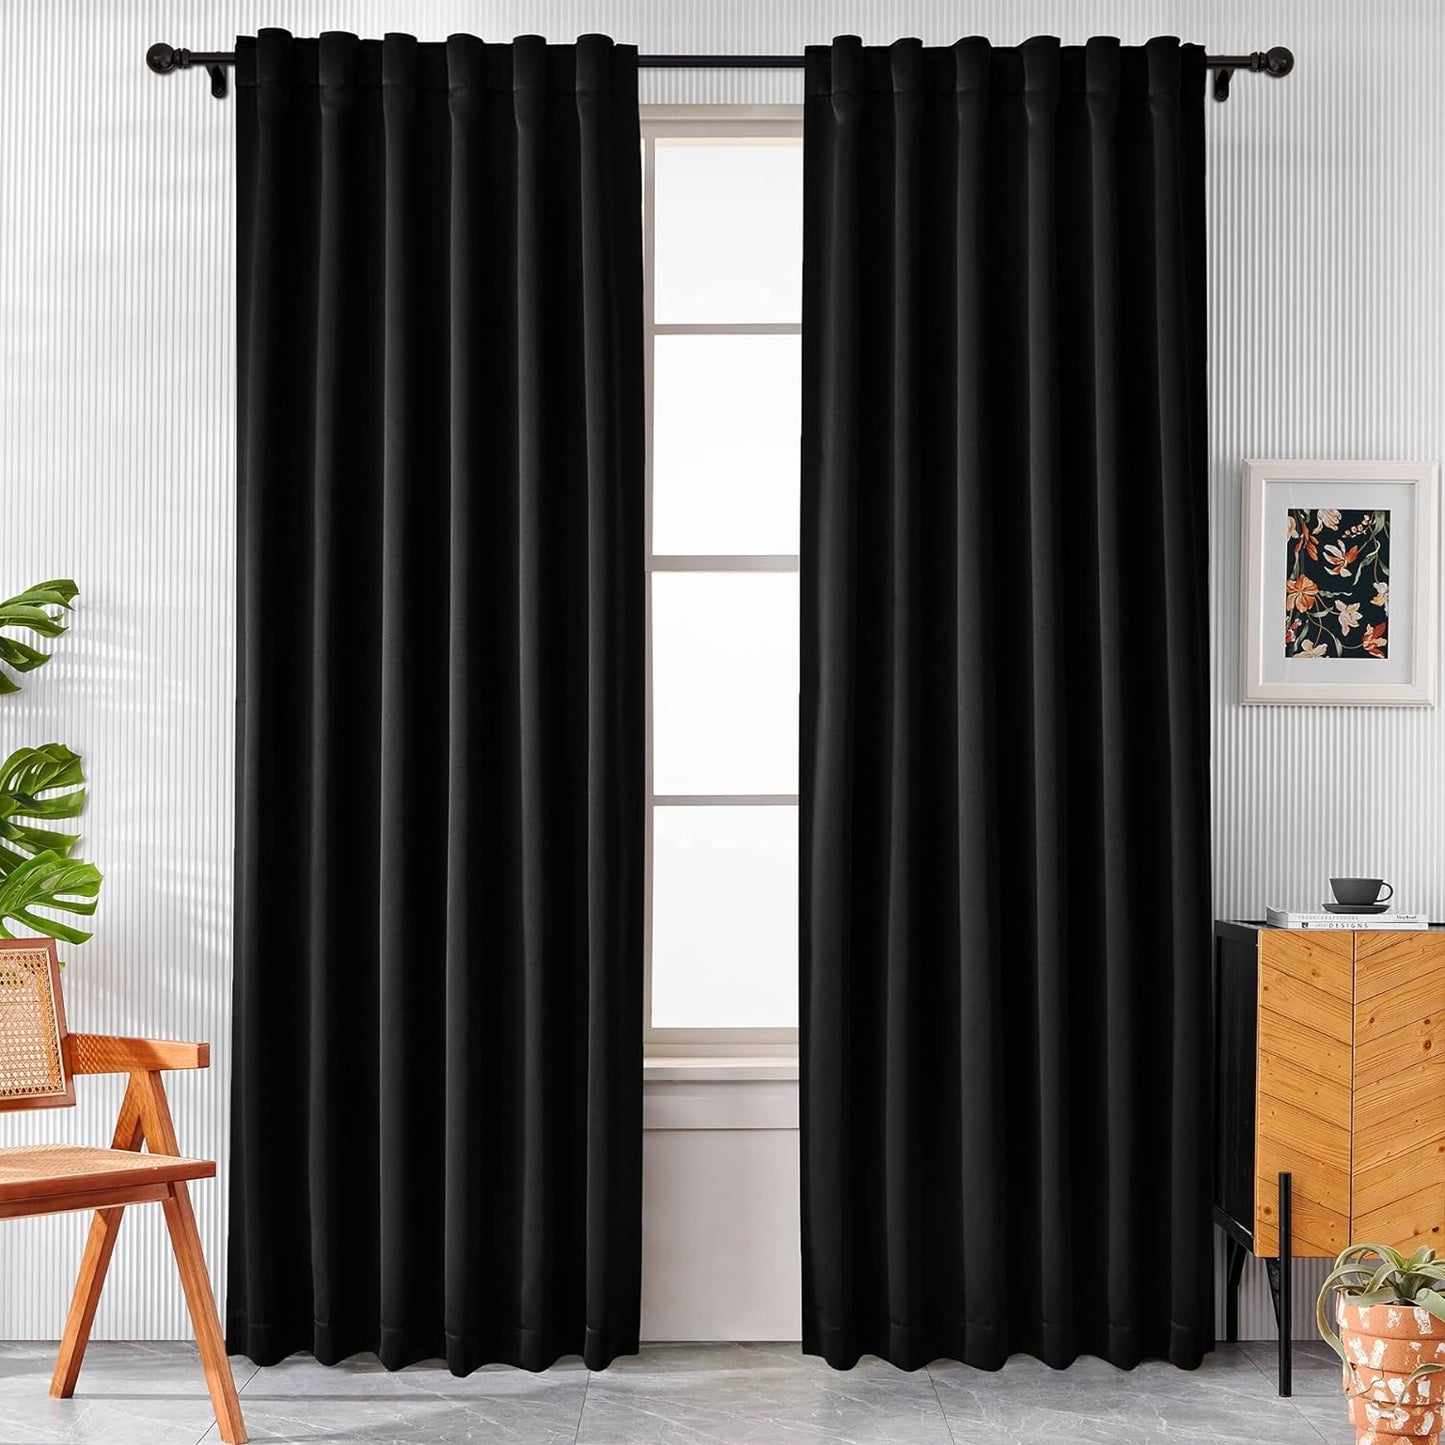 Pickluc Blackout Curtains 96 Inches Long 2 Panels, Black Out Drapes for Bedroom or Living Room, Back Tab and Rod Pocket Top, Set of Two, Dark Grey, 52" Wide and 96" Length.  Pickluc Black 52"W X 96"L 